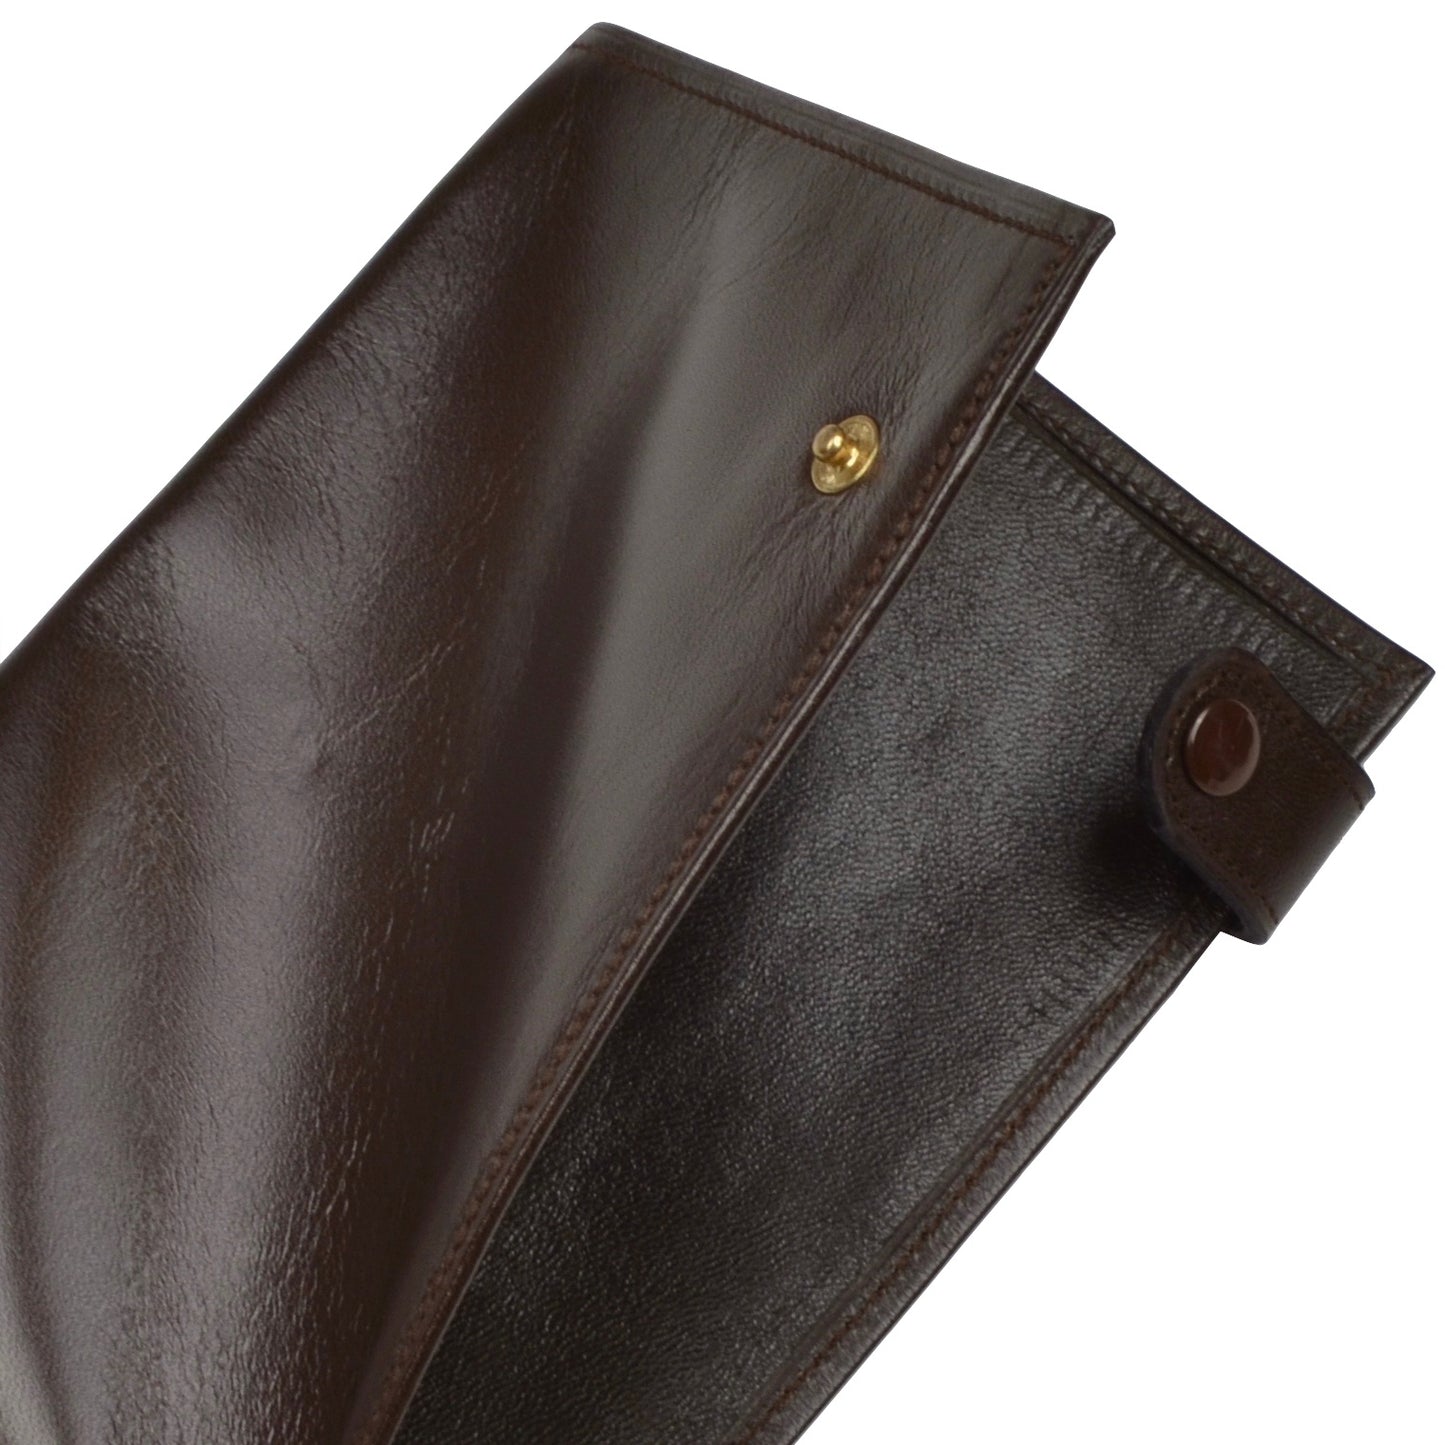 Snap-Closed Leather Passport Case/Wallet - Chocolate Brown